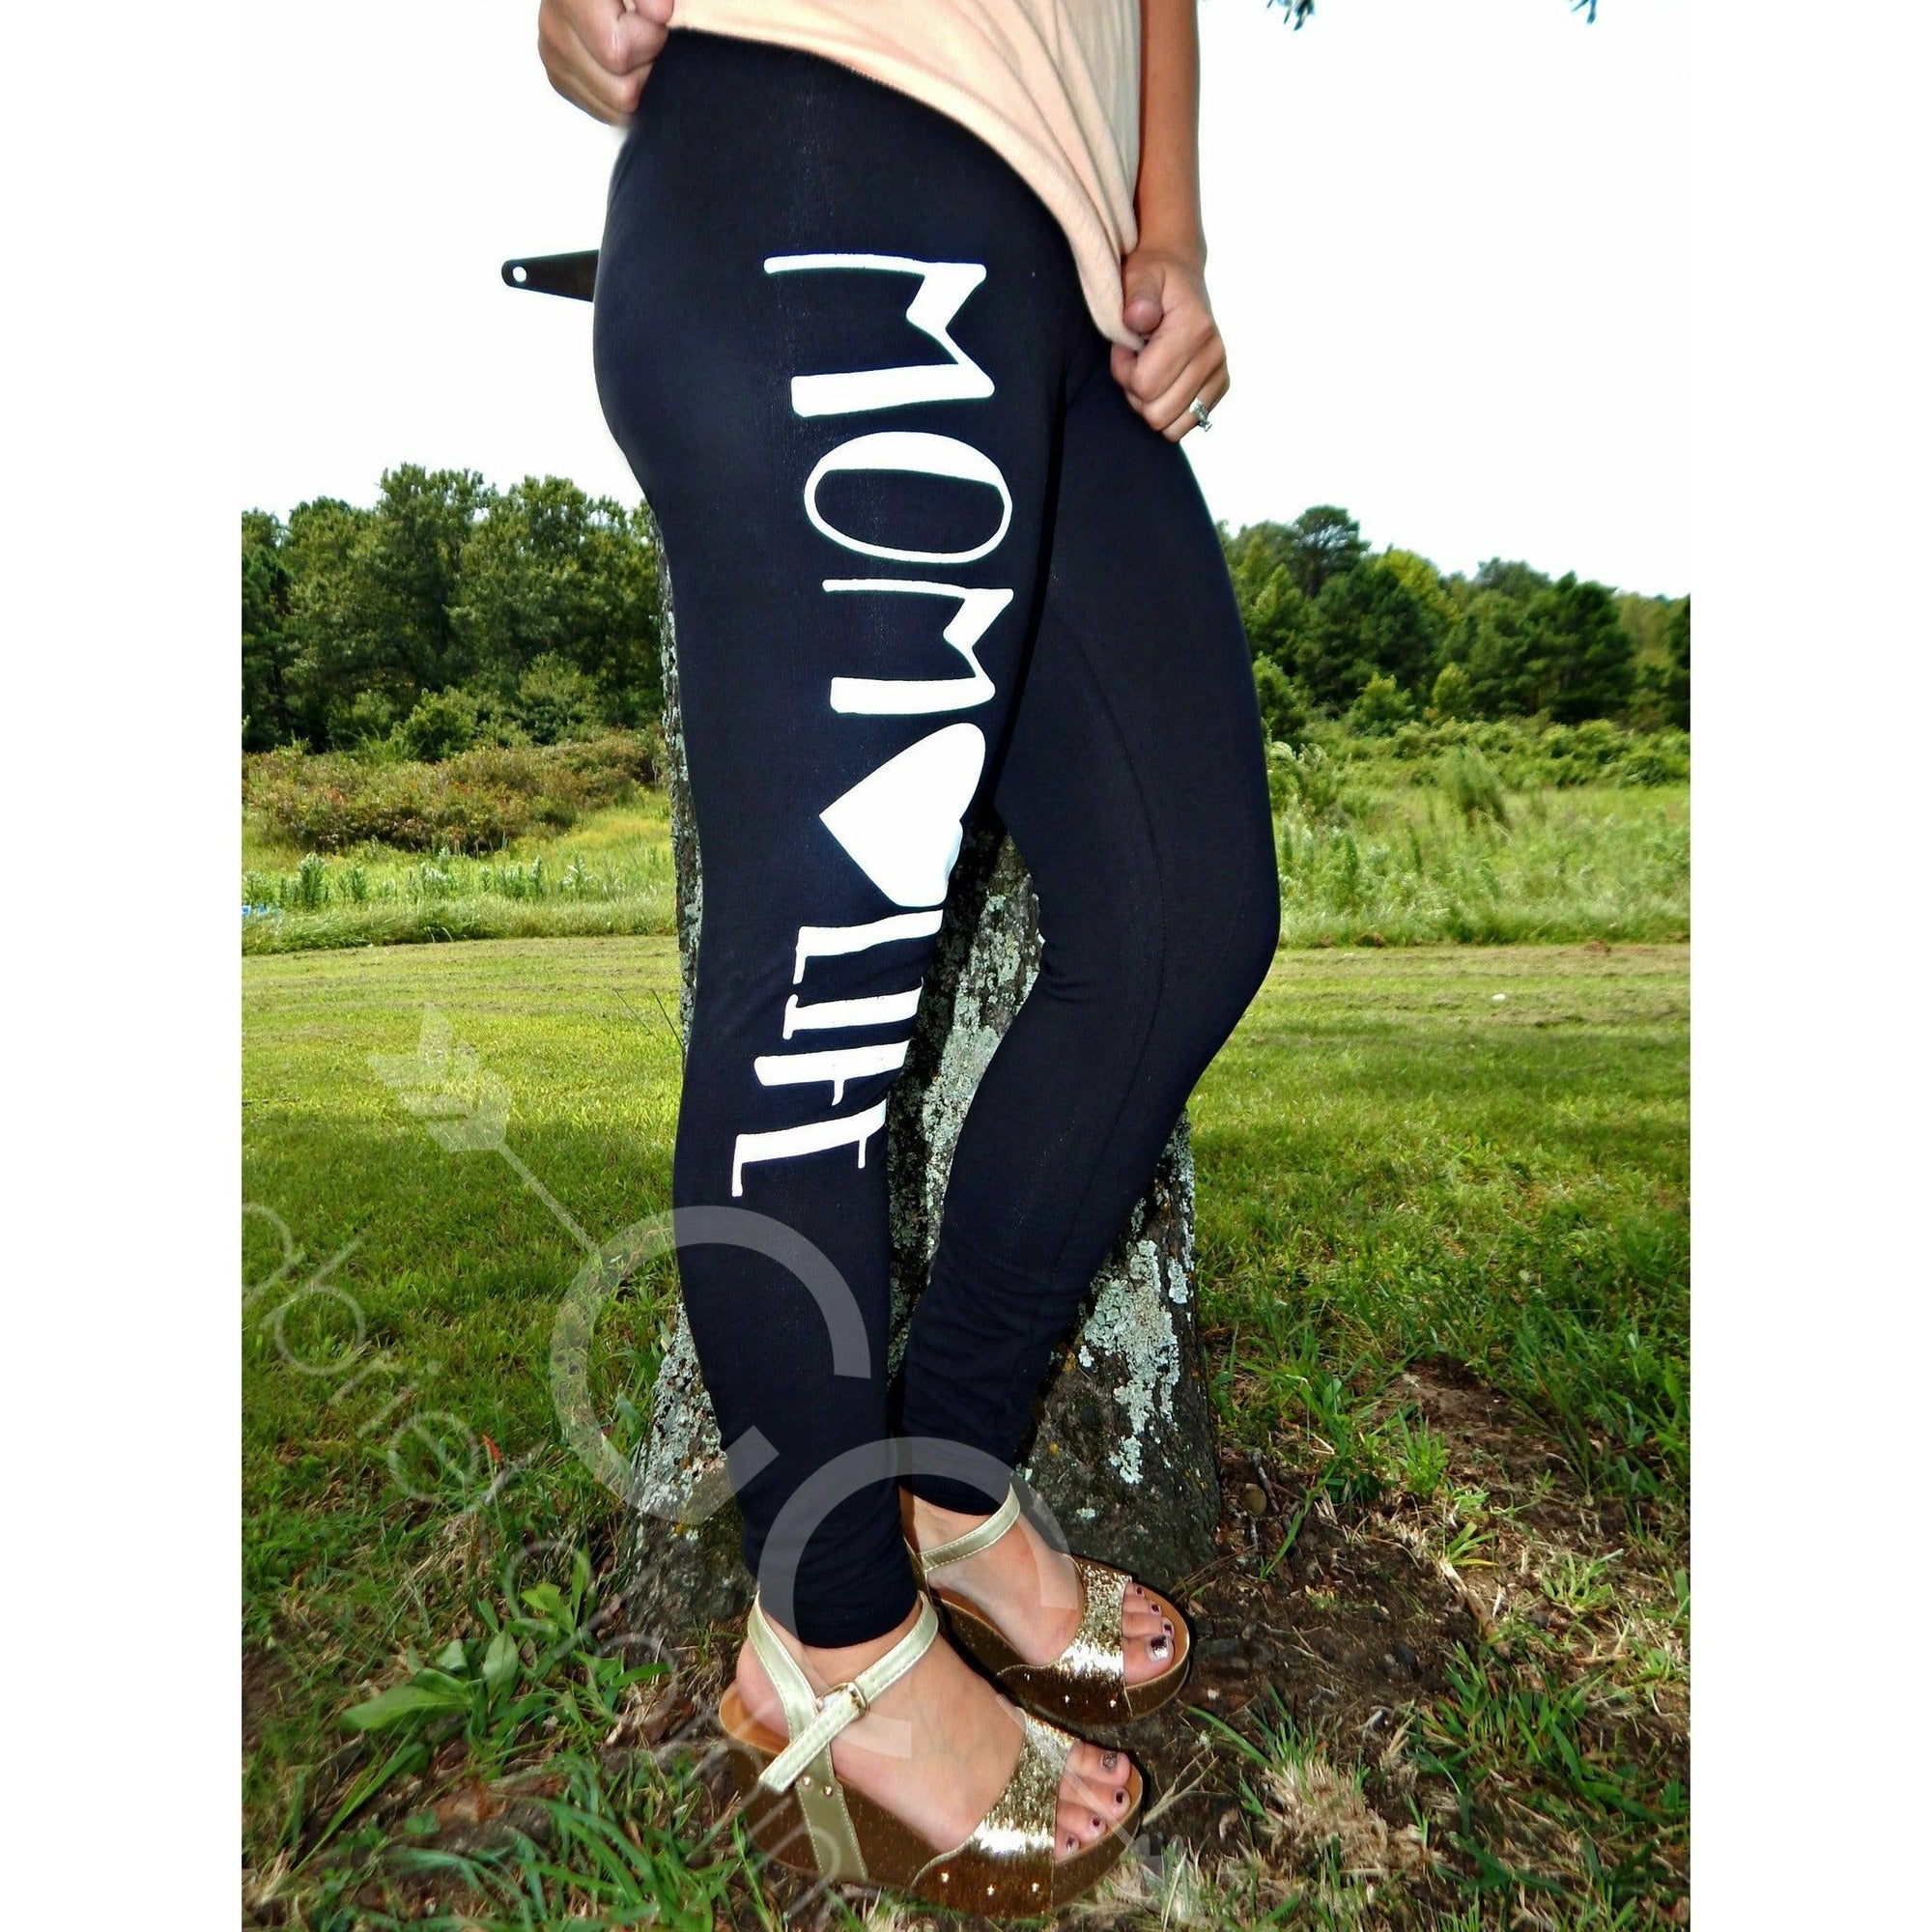 Comfy Mom Life Legging 1 pair (4 colors, not see through) - couponlookups